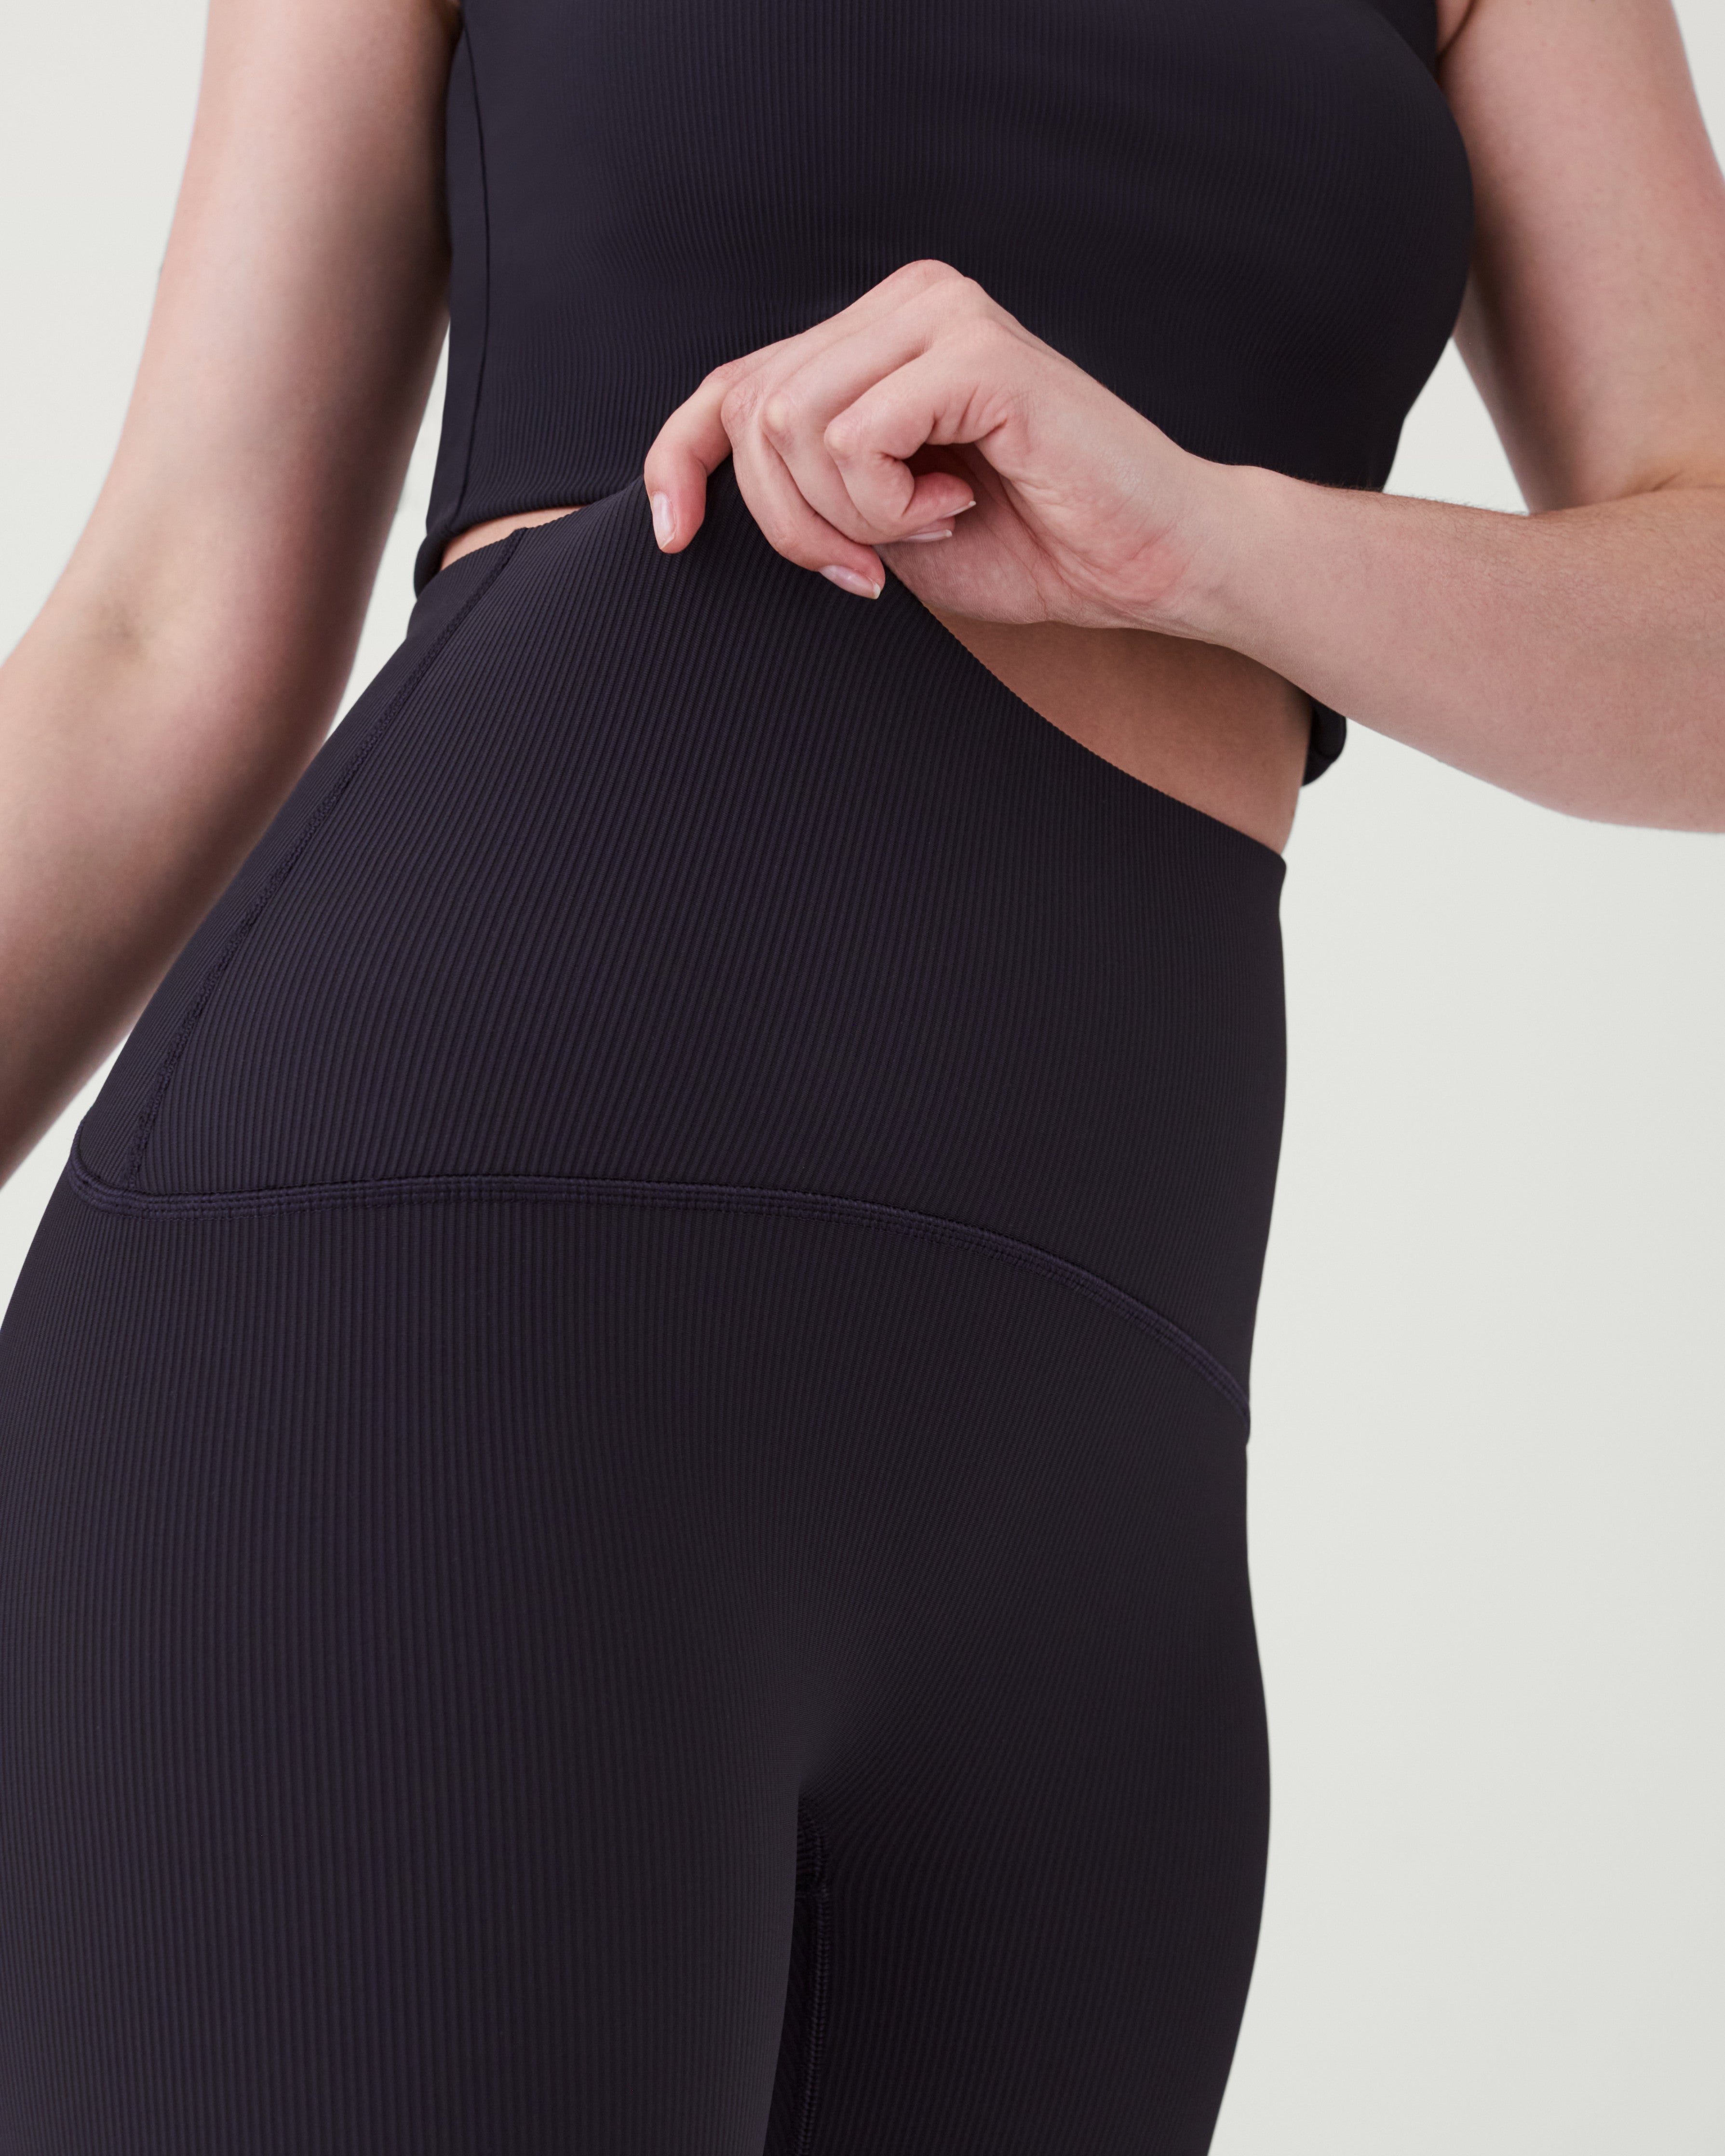 SPANX Solid Black Leggings Size XS - 59% off